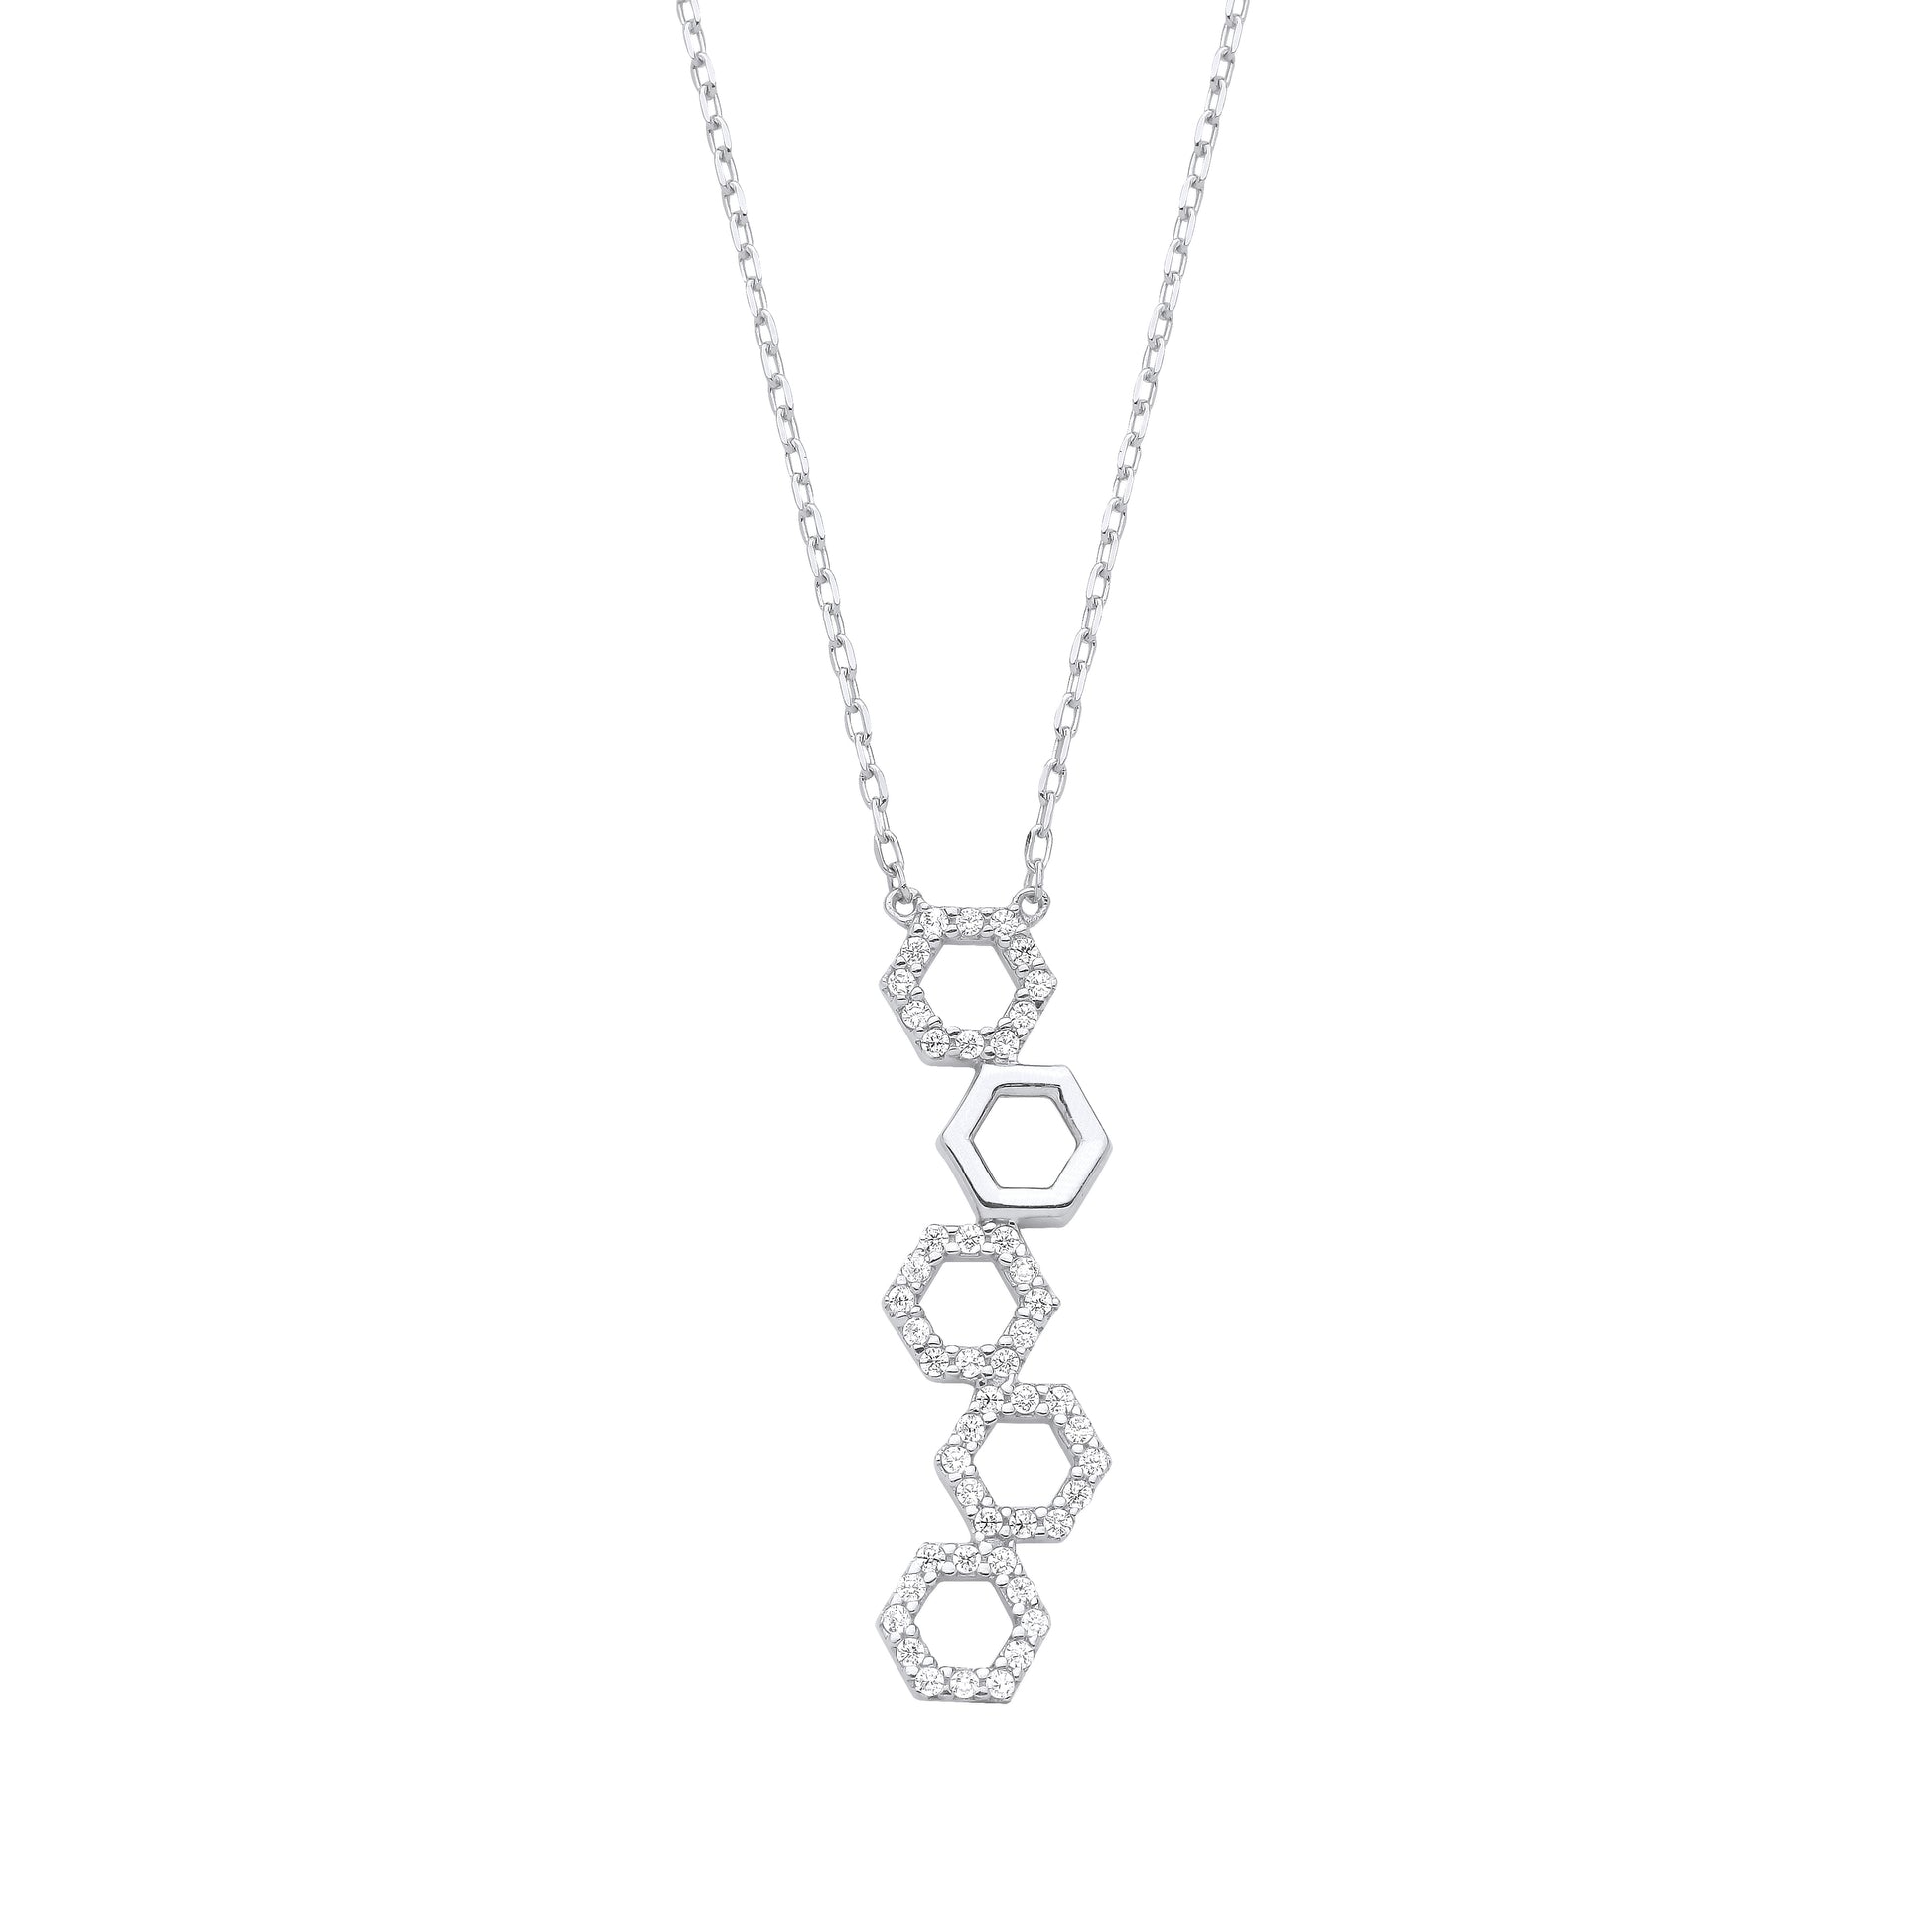 Silver  SheshBesh 5 Hexagons Lavalier Necklace - GVK391